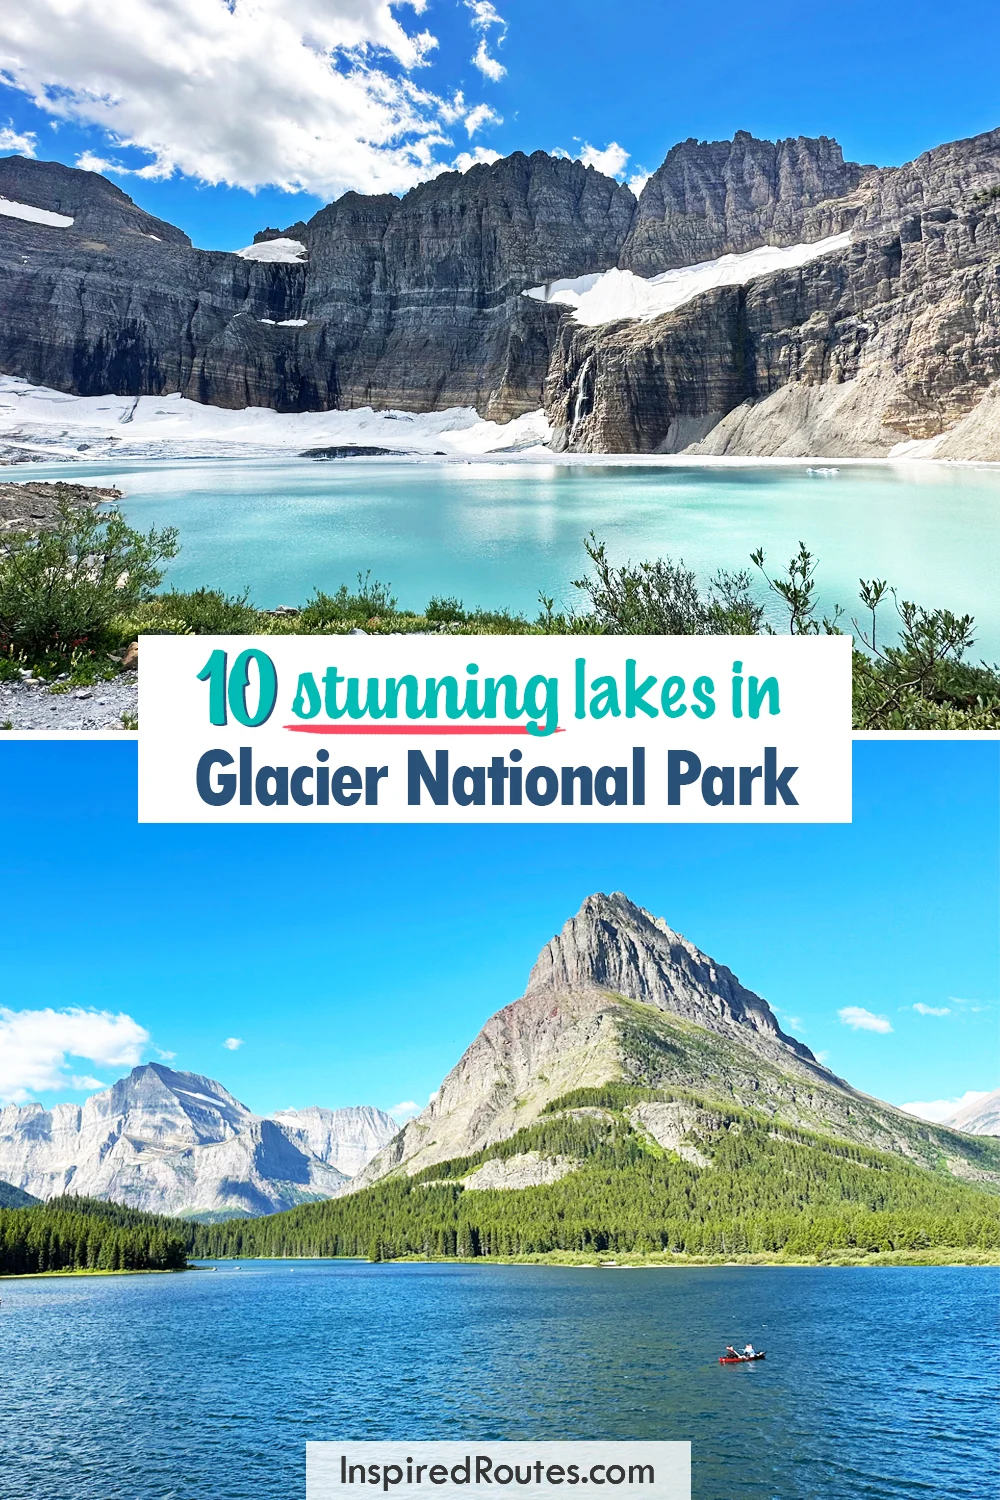 two photos of lakes and mountains with text that reads 10 stunning lakes in Glacier National Park